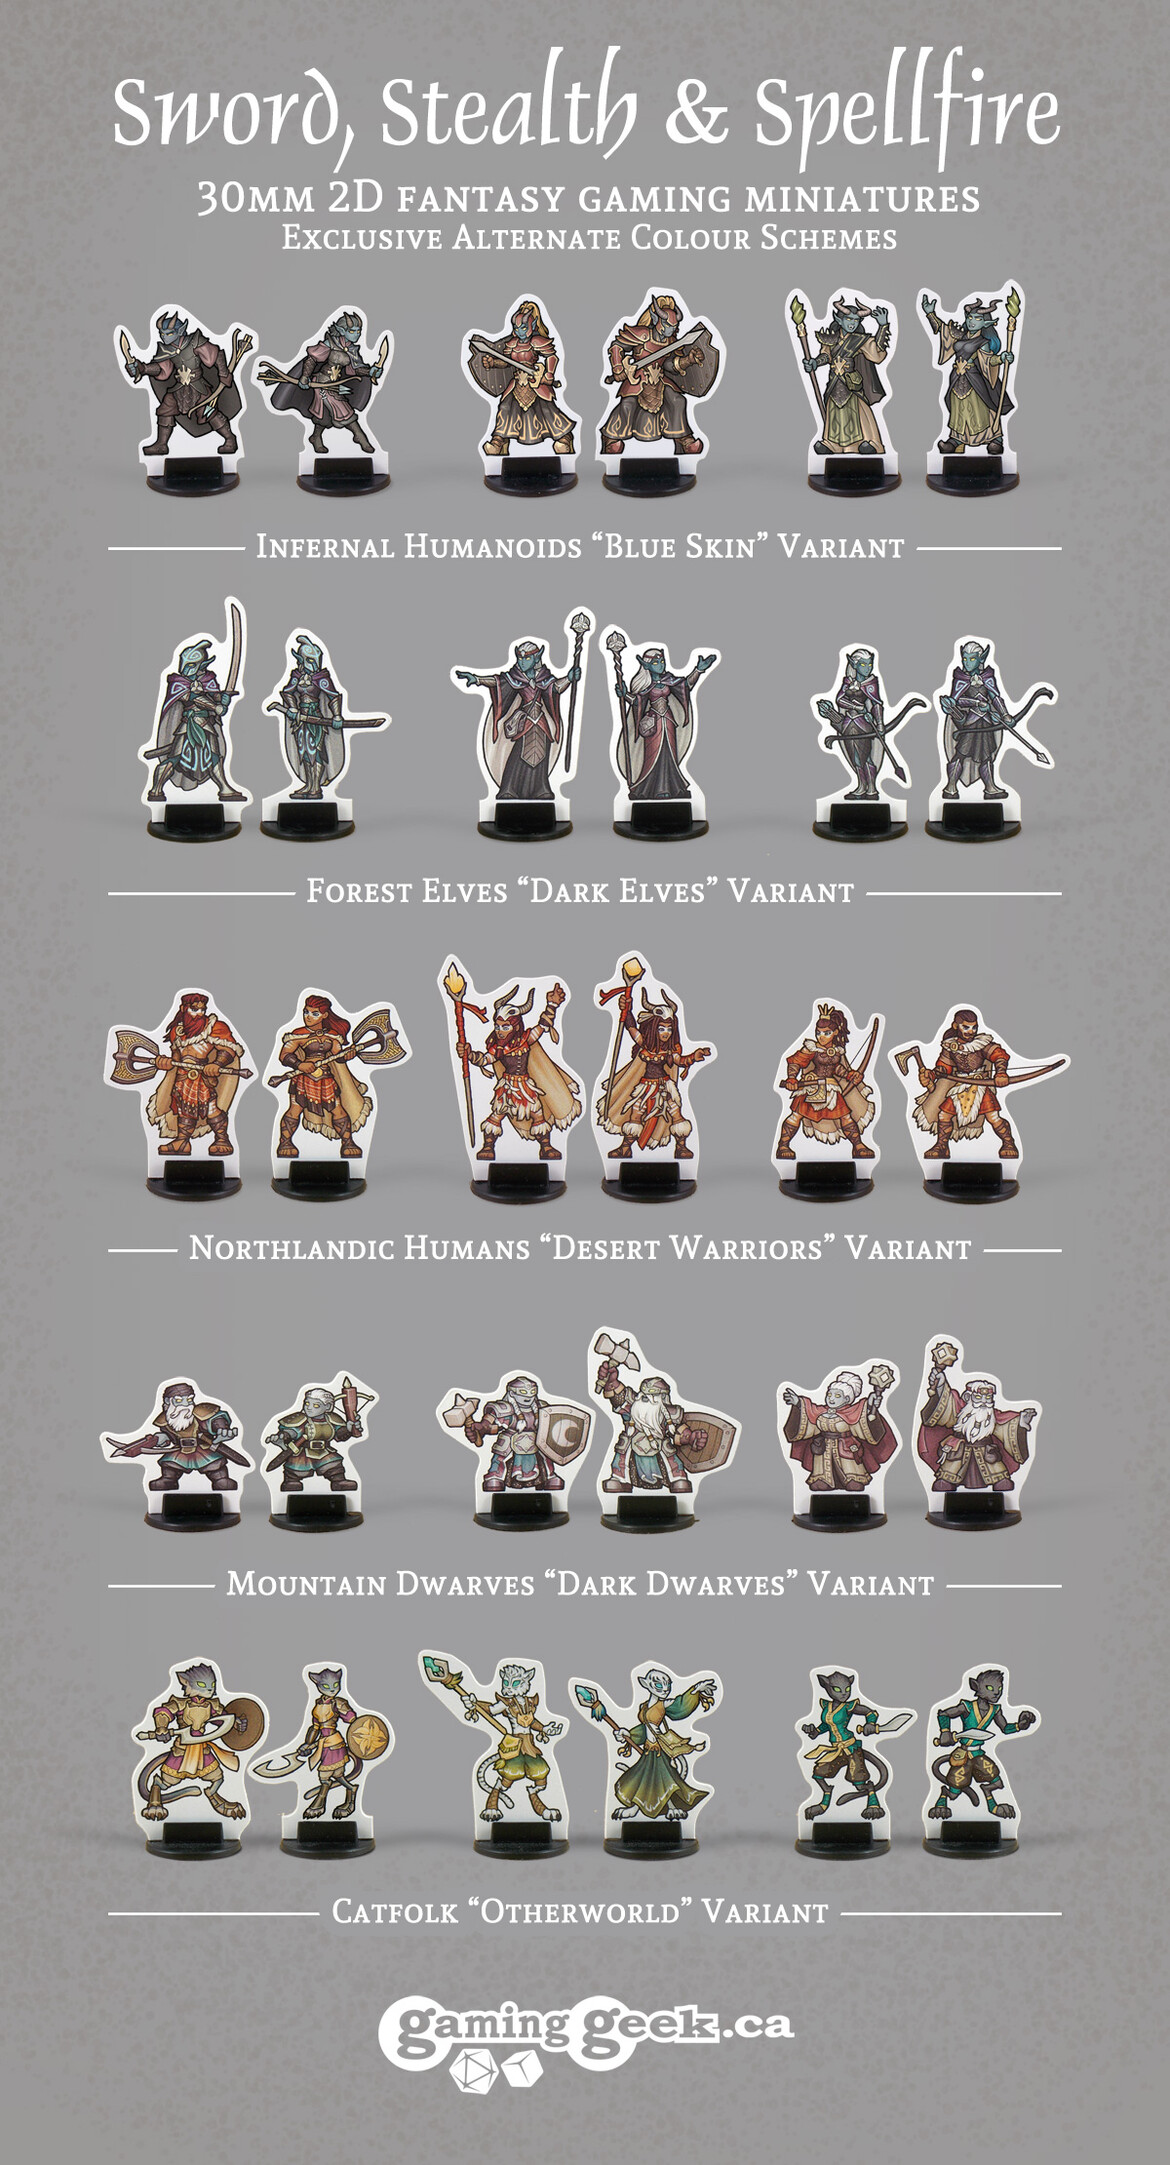 Altnerate colour schemes of the Sword, Stealth & Spellfire minis, available only to backers.